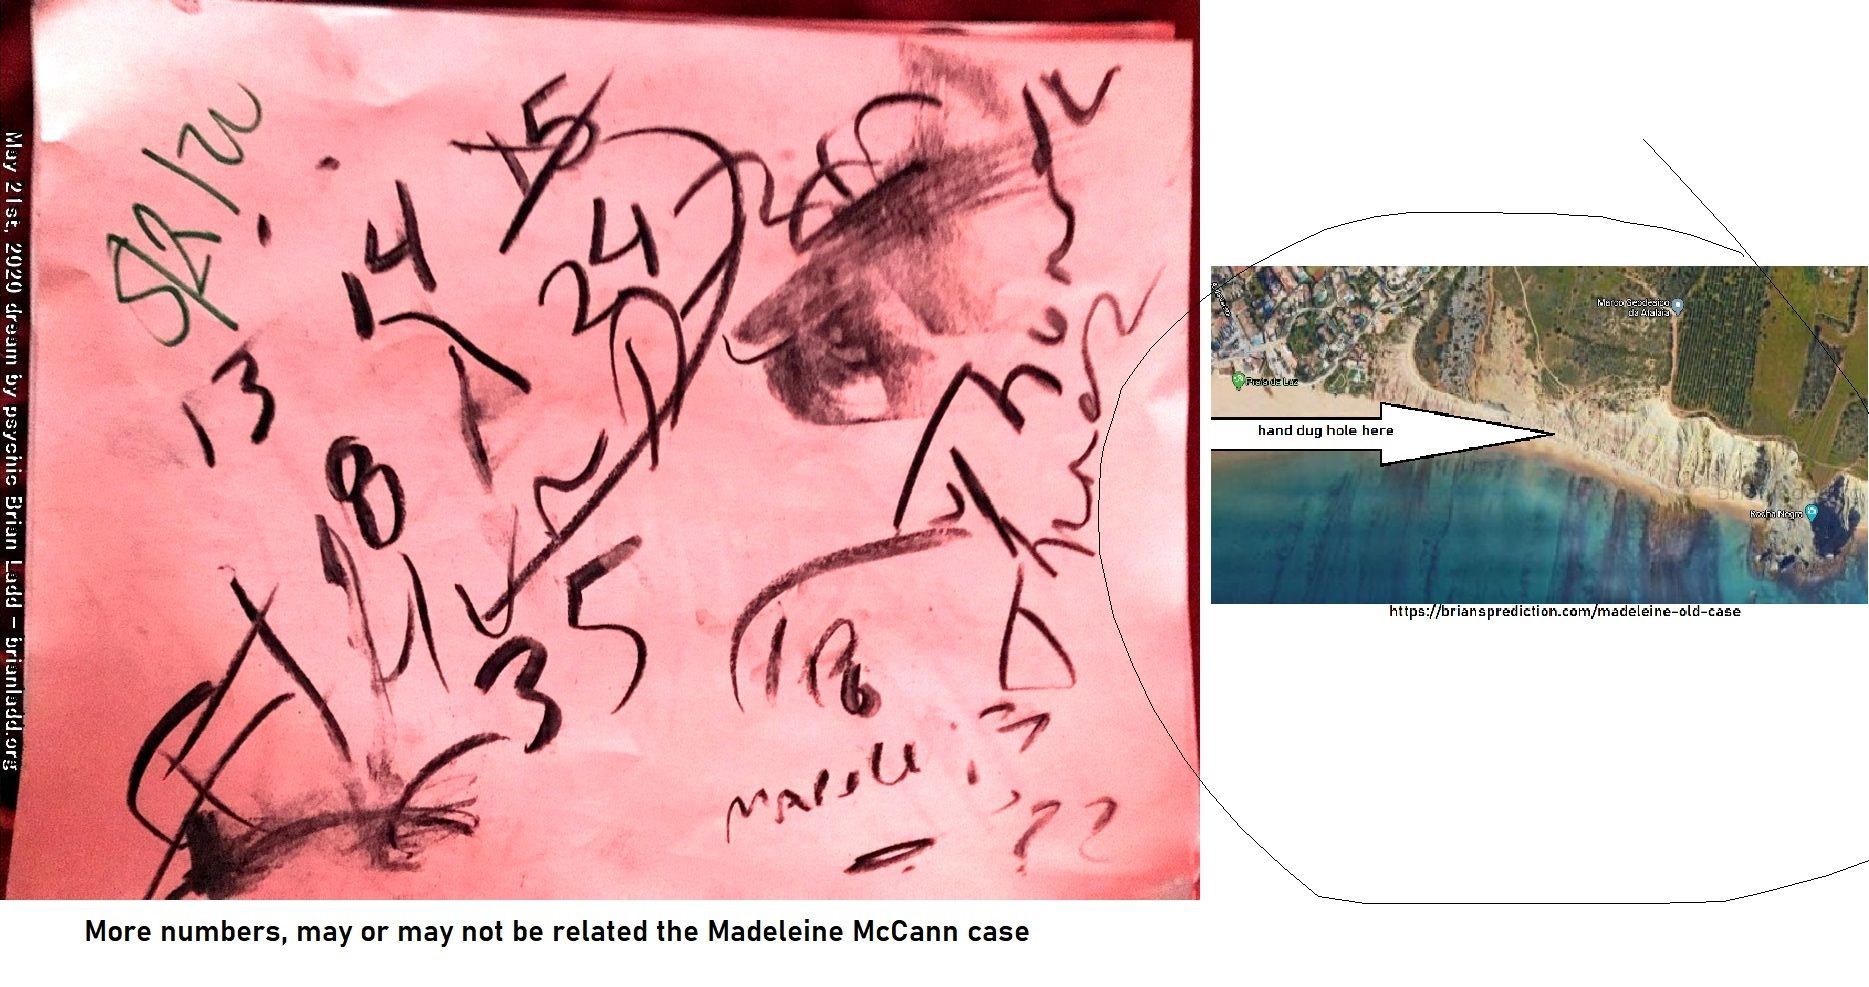 The Remains Of Missing Person Madeleine Mccann Located By A Metal Detector At This Location 13091 21 May 2020 1 - From 4...
From 4 Dd'S Dated May 21st 2020  Everything Is The Same As Past Dreams Expect For The Name  Ulrich Markurth (spelling May Be Wrong Or It Might Be A Place In Portugal)  The Remains Of Missing Person Madeleine McCann Located By A Metal Detector At This Location, Praia Da Luz Portugal Beach, This Information Has Been Posted At Least 20 Times By Me, The Location Has Not Changed Nor Has Anything Else On The 4 Dream Drawings From May 21st, 2020....Anytway, I Know This Area Has Been Searched Before...Please Do It Again, I'Ve Been Working On This Case Before She Was Reported Missing.  Old Case At   https://briansprediction.com/Madeleine-Old-Case   https://briansprediction.com/Madeleine-New-Case  Or Search My Site For The New Stuff (logon Suggested To View Images In Full)   info  Madeleine Beth McCann (born 12 May 2003) disappeared on the evening of 3 May 2007 from her bed in a holiday apartment at a resort in Praia da Luz, in the Algarve region of Portugal. The Daily Telegraph described the disappearance as 